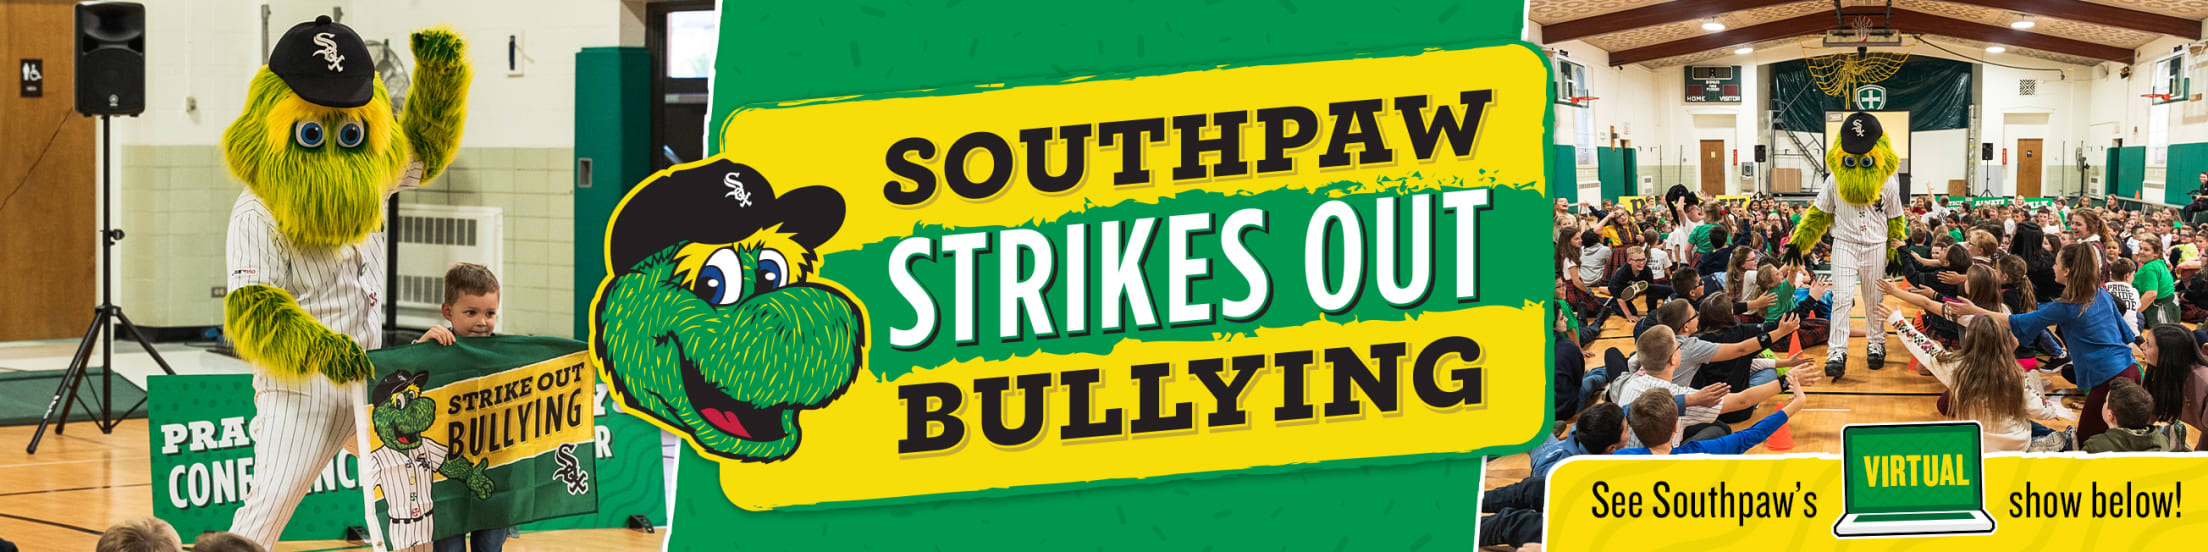 Southpaw Strikes Out Bullying, Southpaw